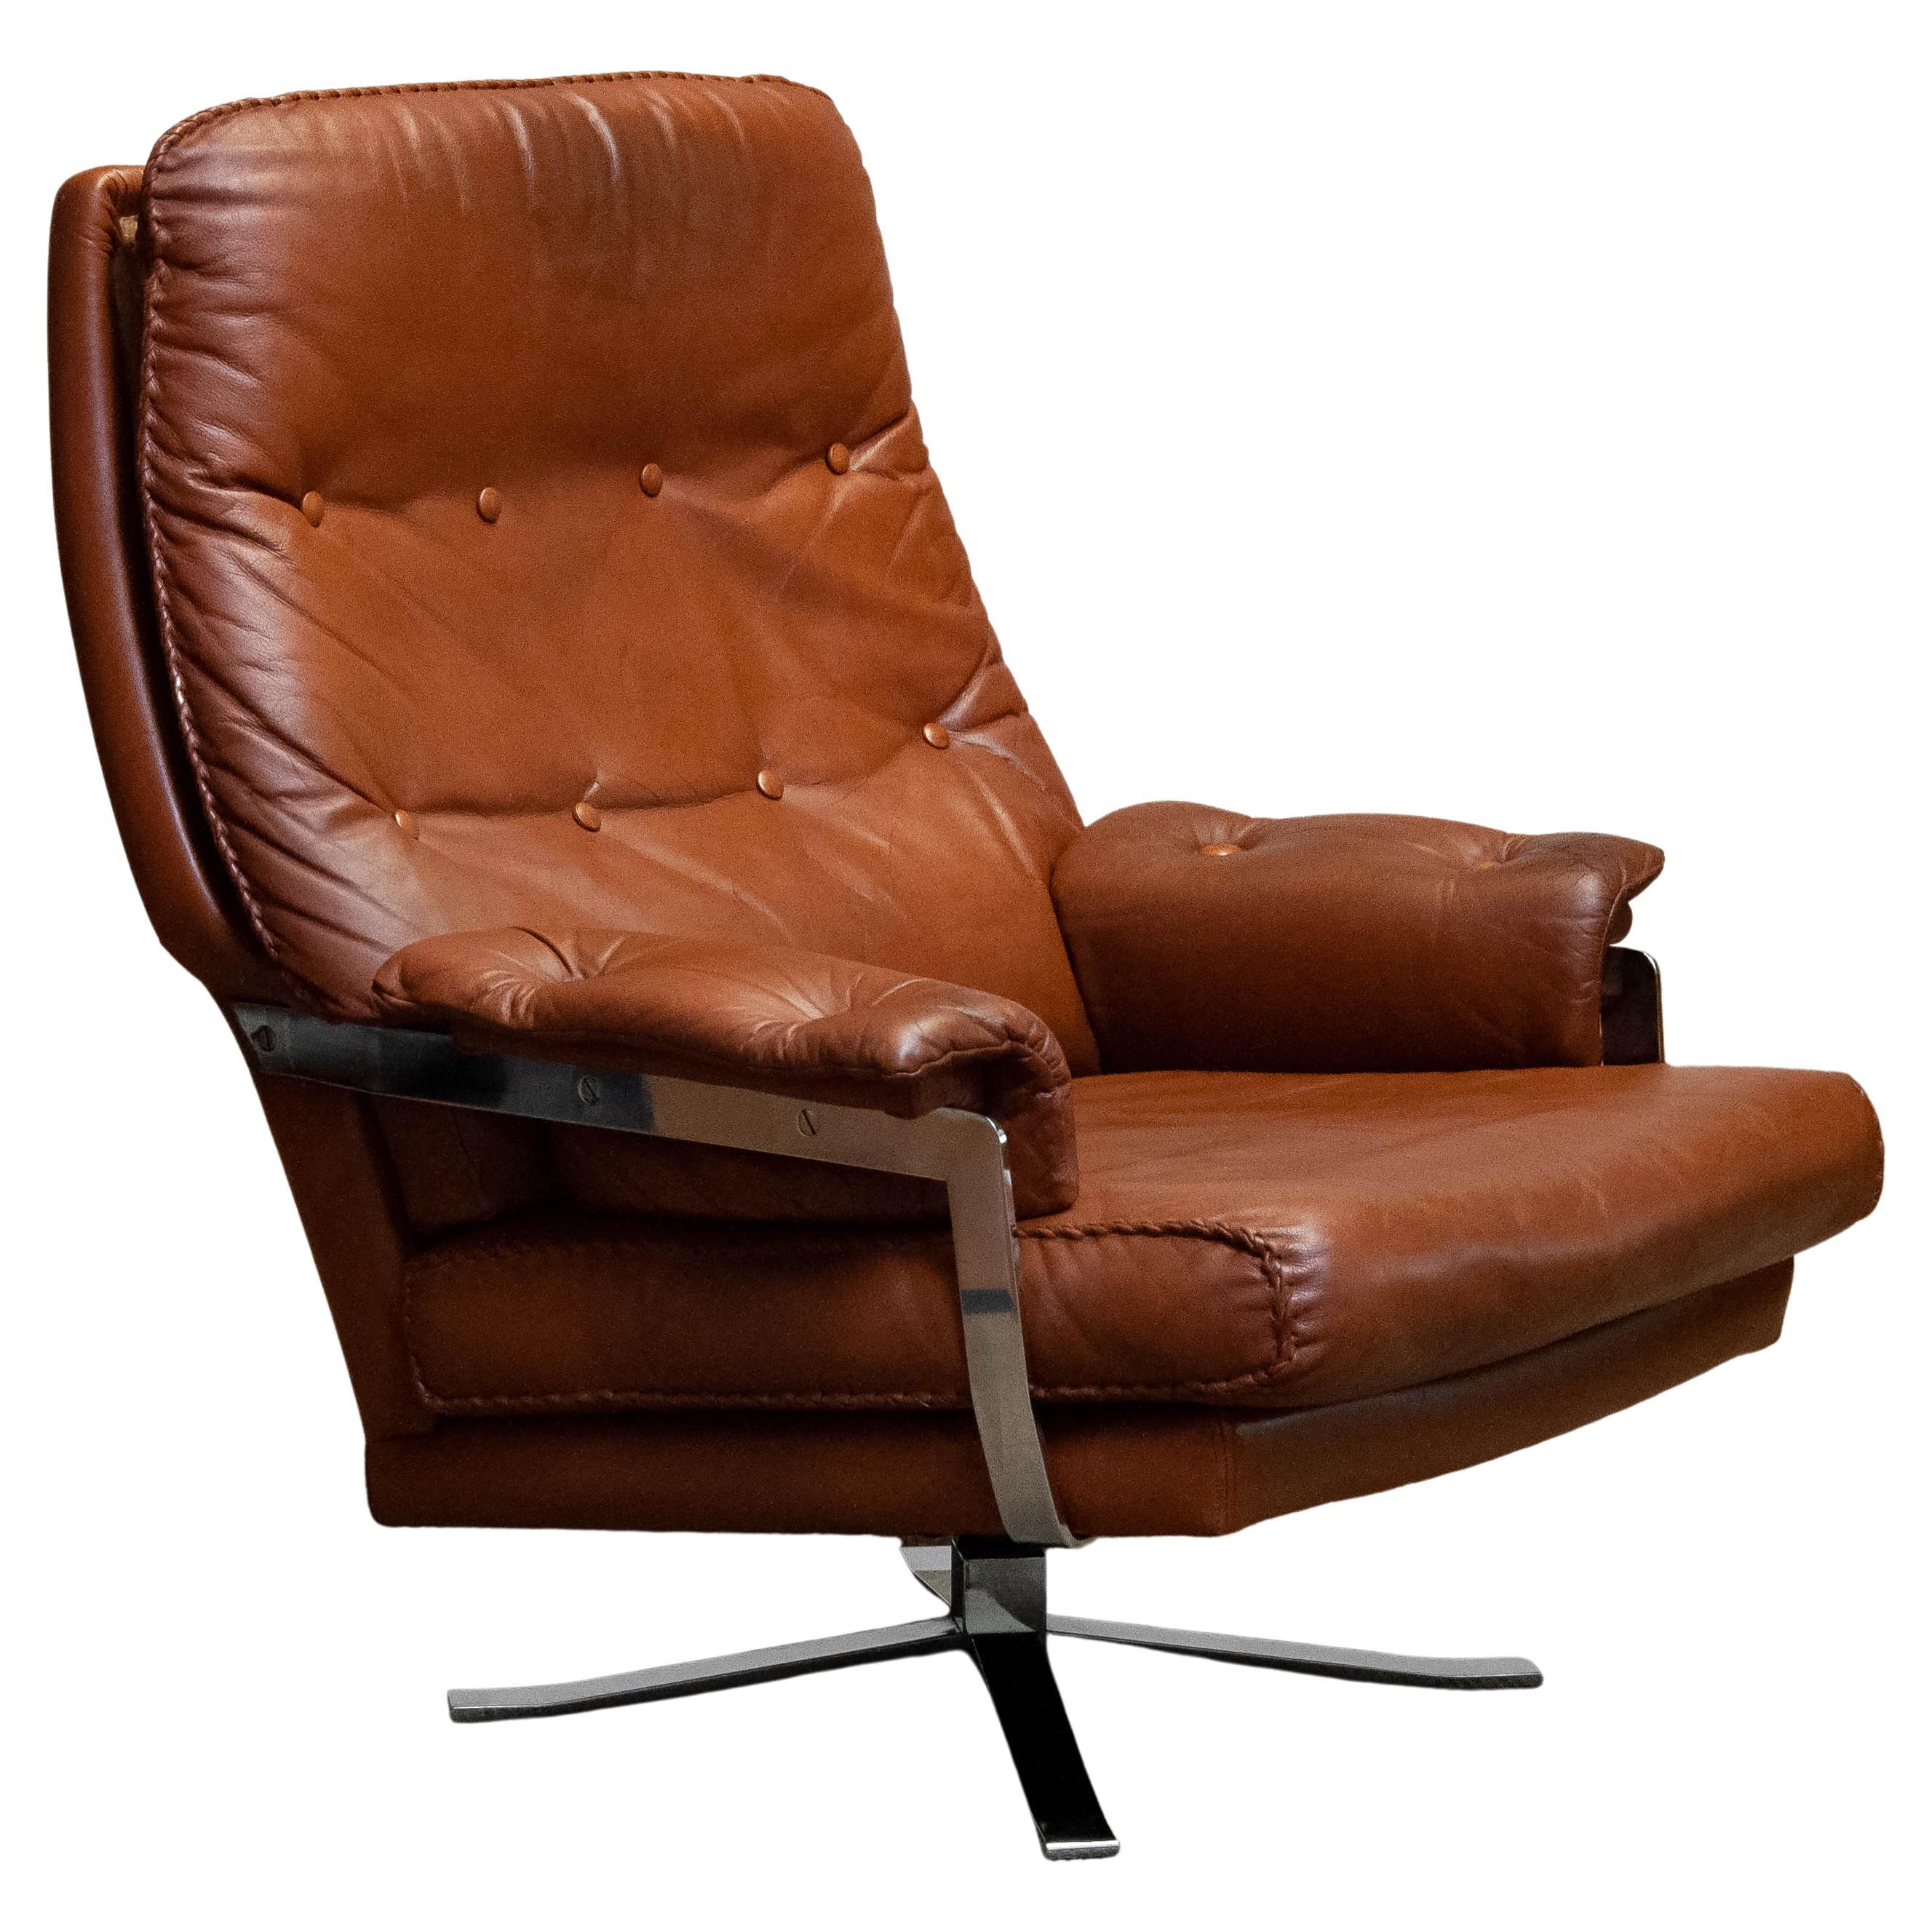 60s Tan Brown Handstitched Leather Swivel Chair by Arne Norell for Vatne Norway For Sale